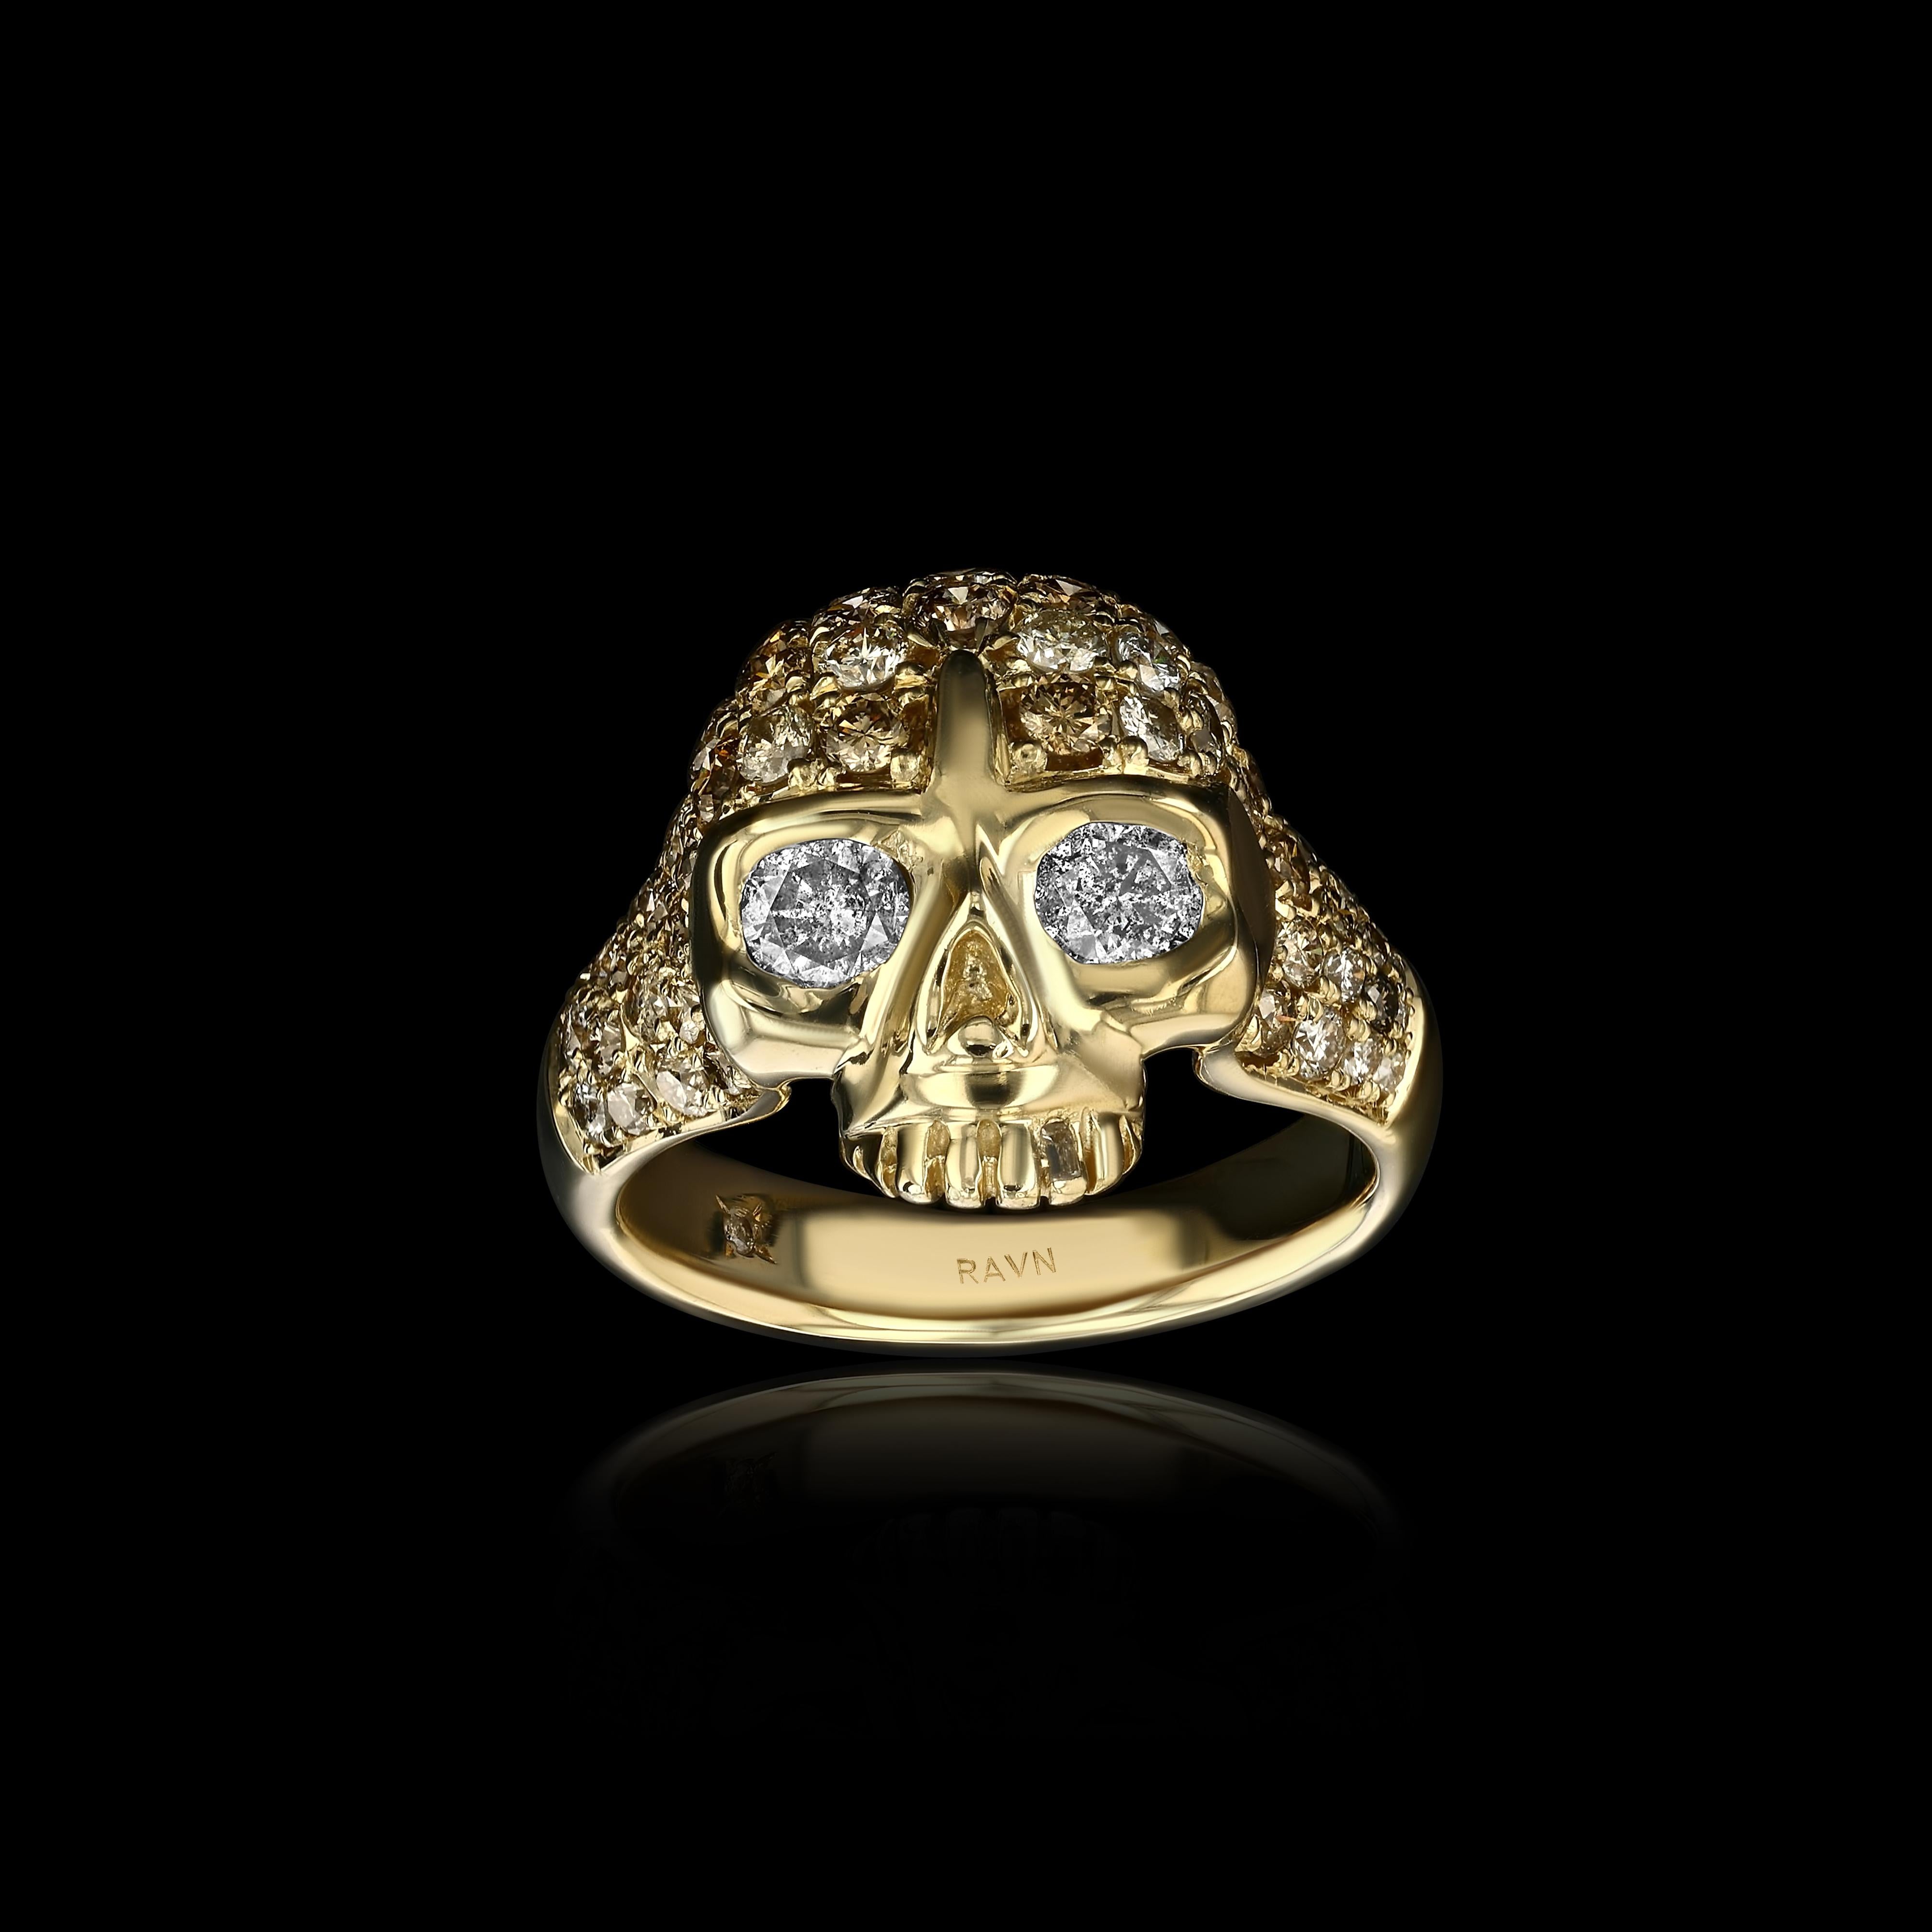 Contemporary House of RAVN, 18k Gold Hand Carved Bling Petite Skull Ring with Diamond Eyes For Sale